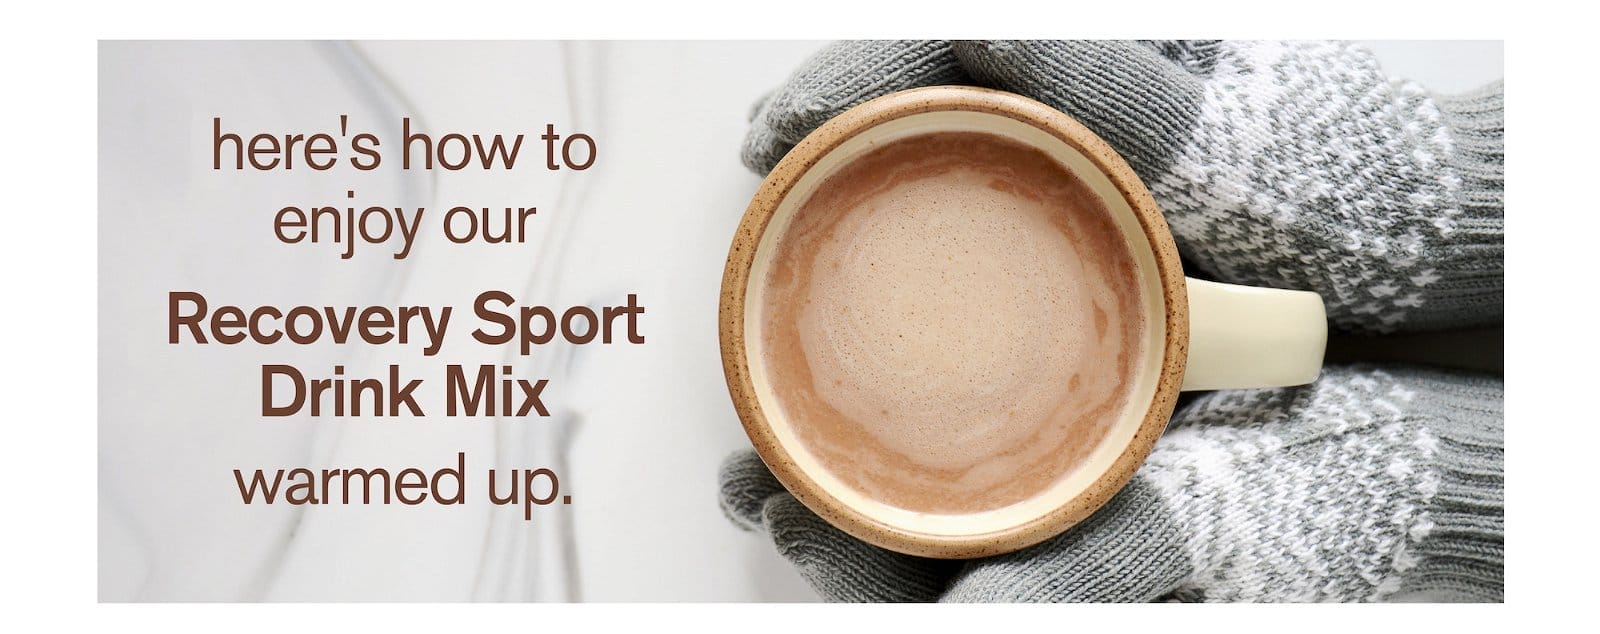 here's how to enjoy our Recovery Sport Drink Mix warmed up.